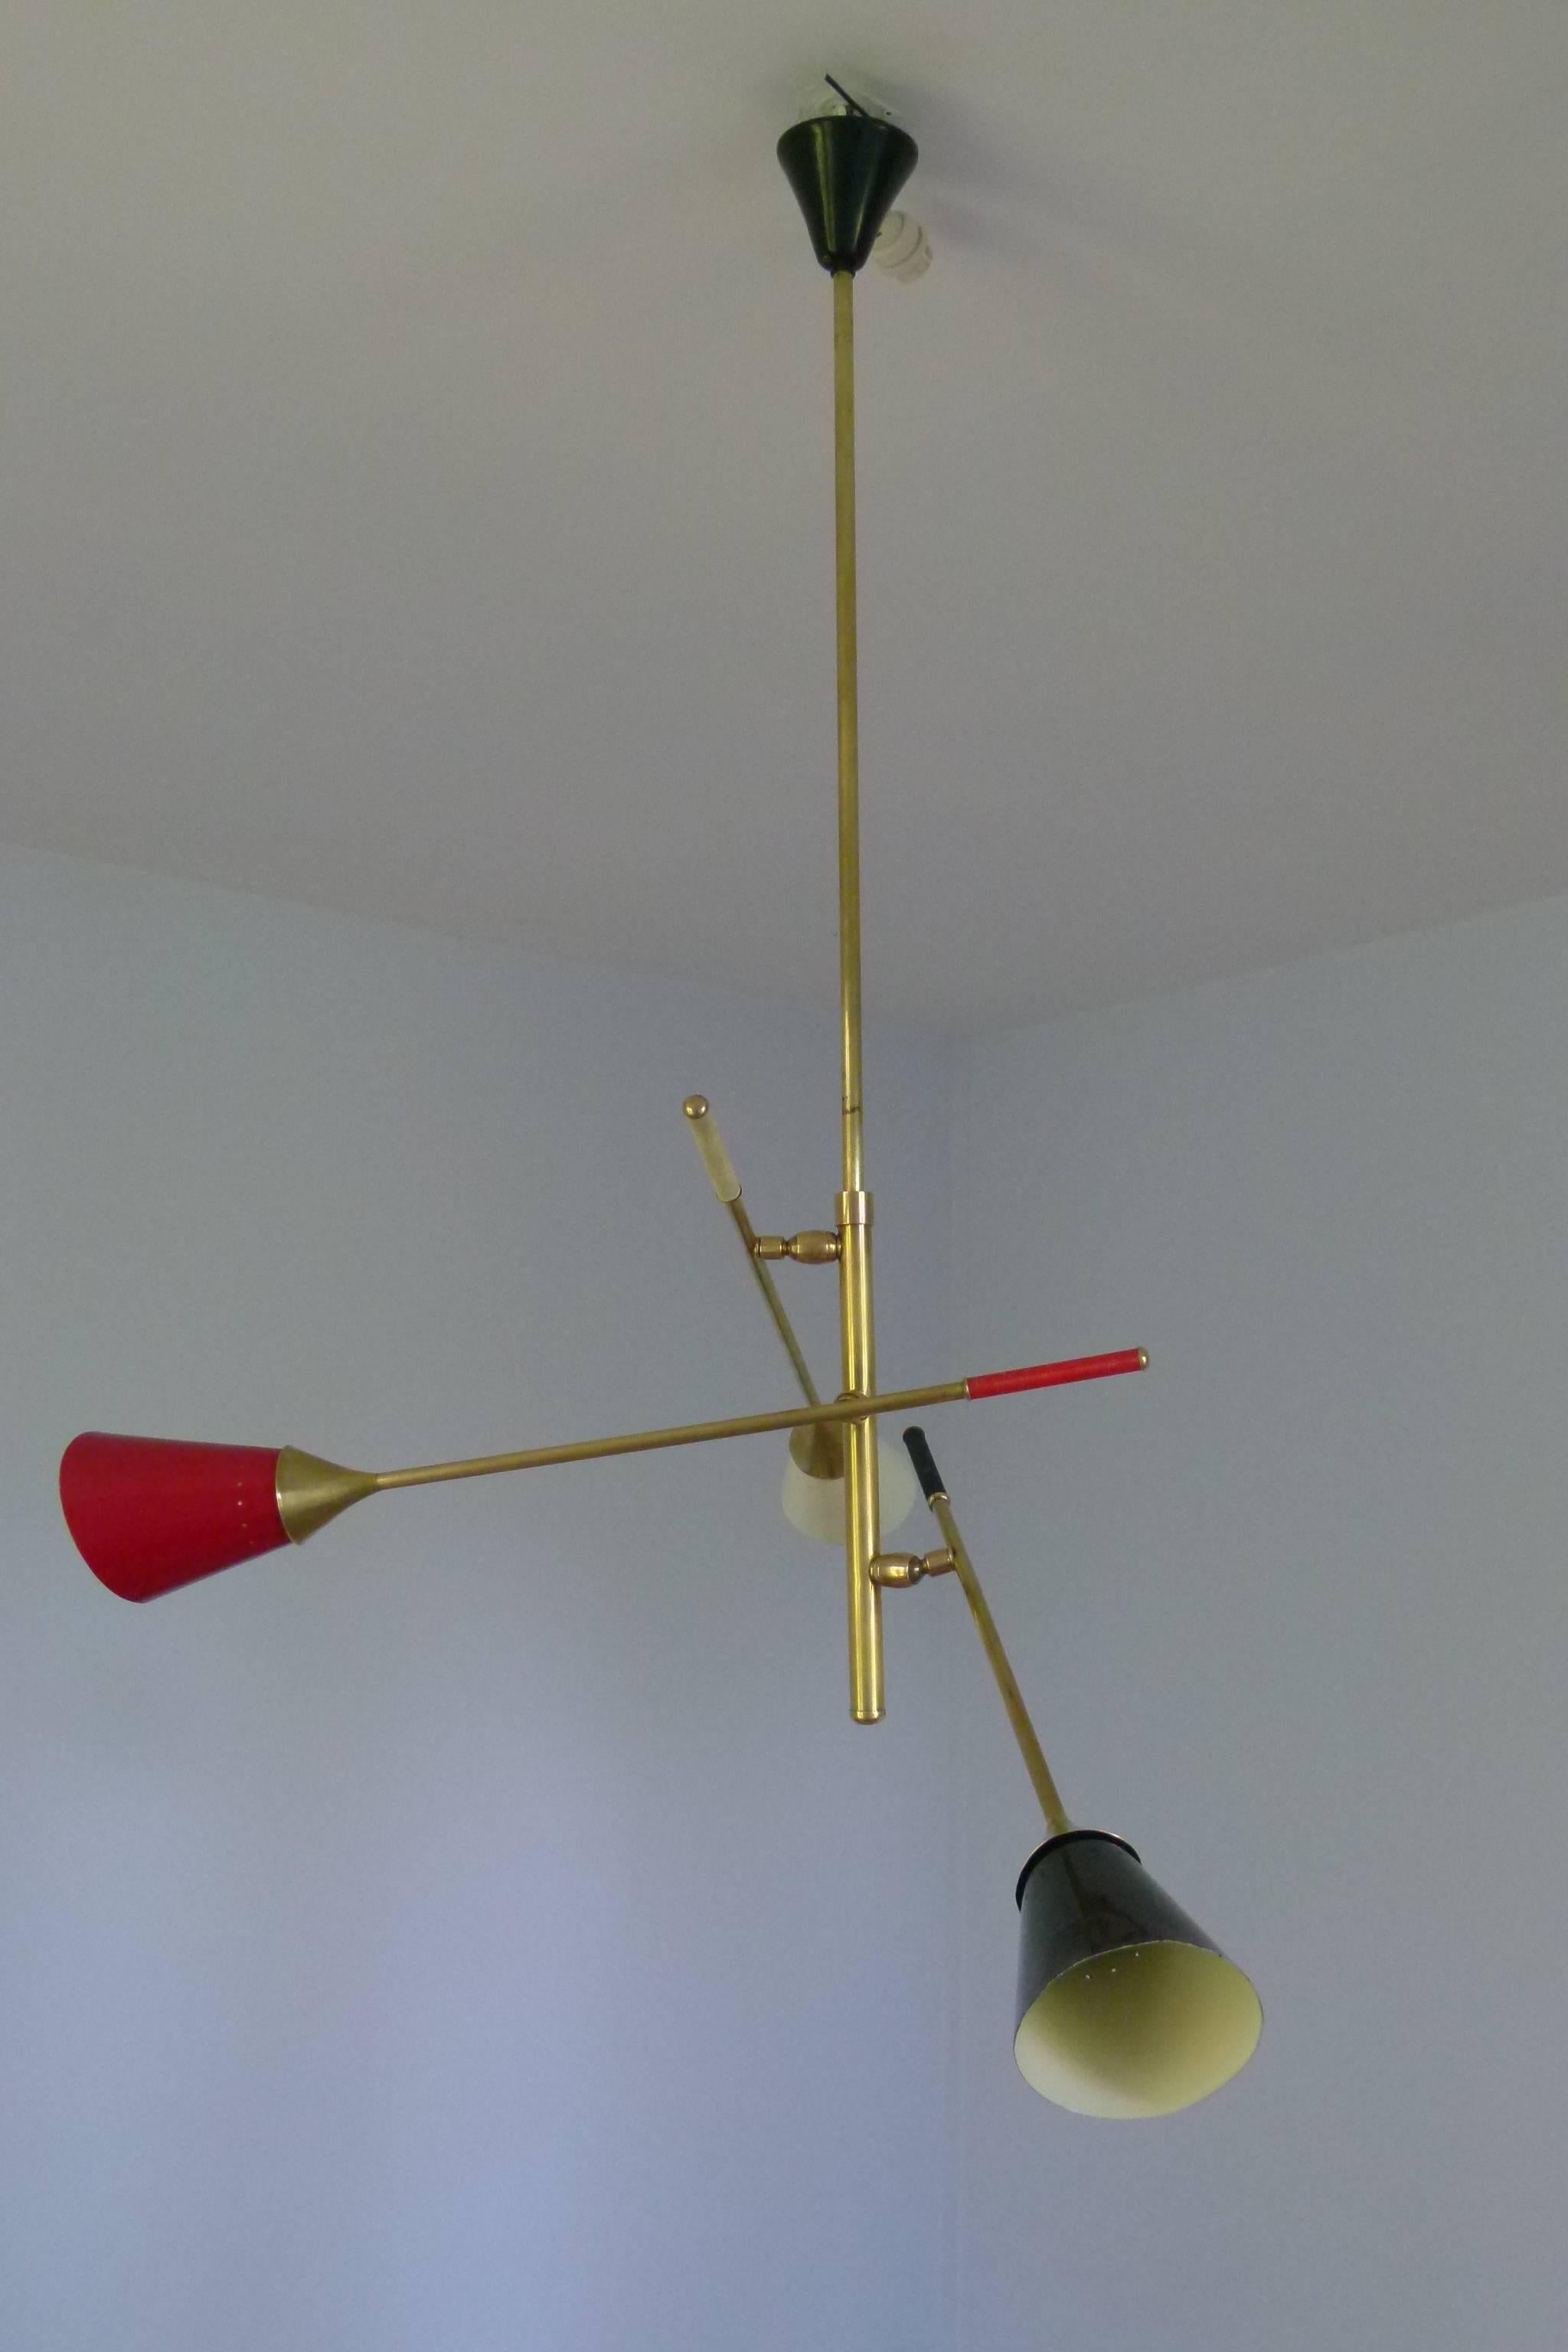 Brass and lacquered metal chandelier consisting of a main brass rod on which are set of three lighted arms mounted on patella for convenient orientation. Each arm is surmounted by a perforated colored metal lampshade and a matching color plastic